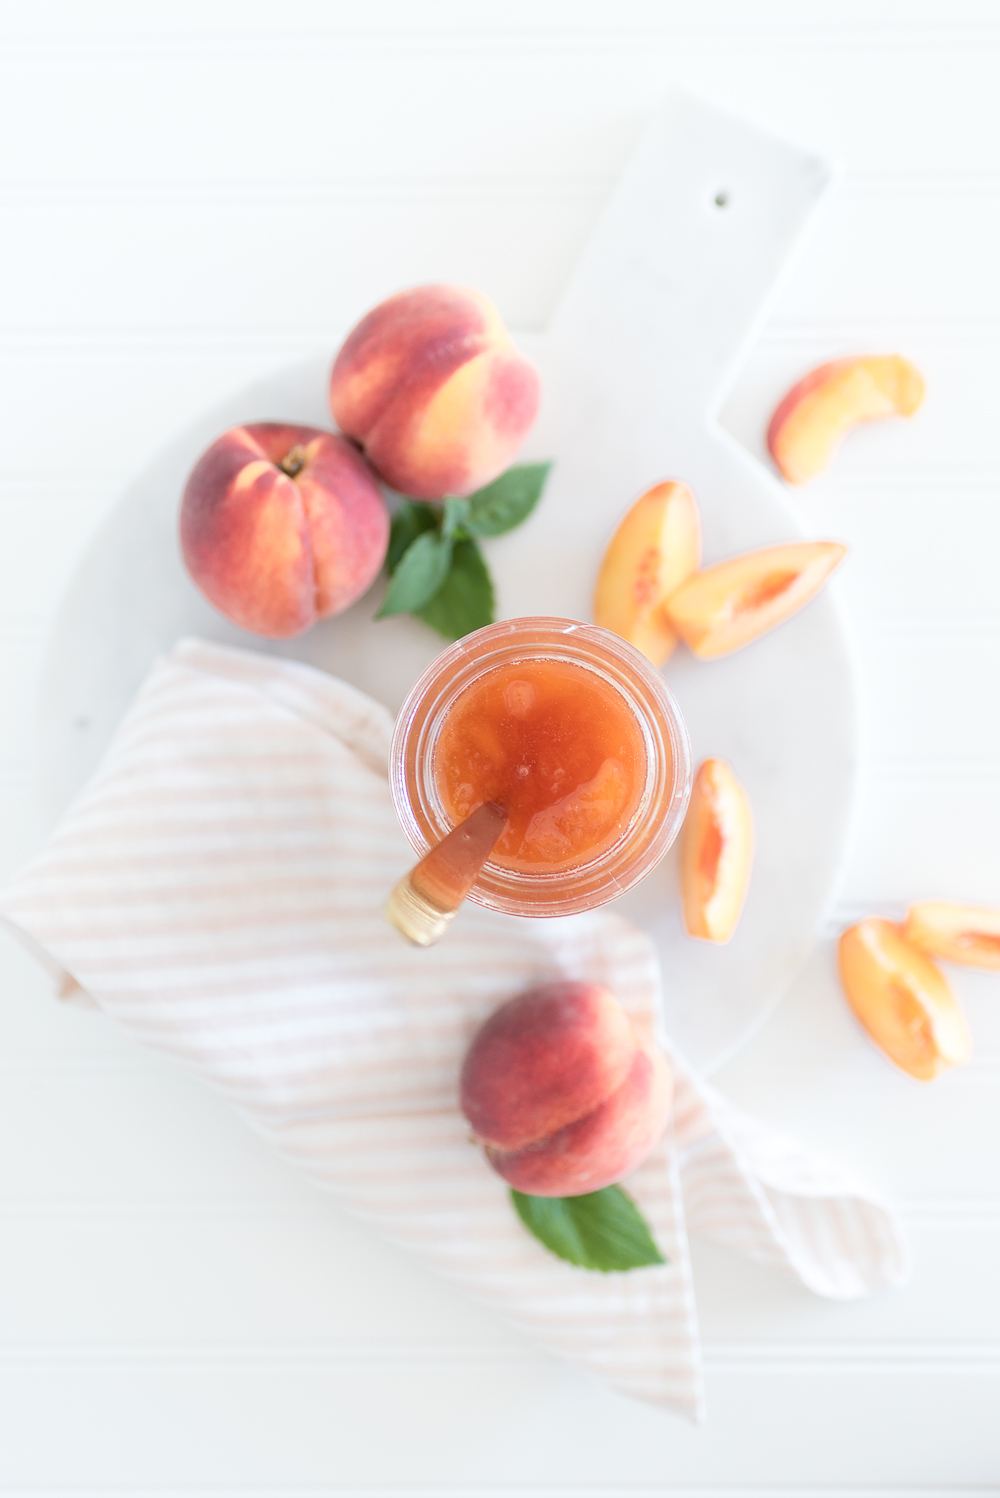 This small-batch peach jam recipe with a hint of spice is easy since it doesn't involve the traditional canning process.